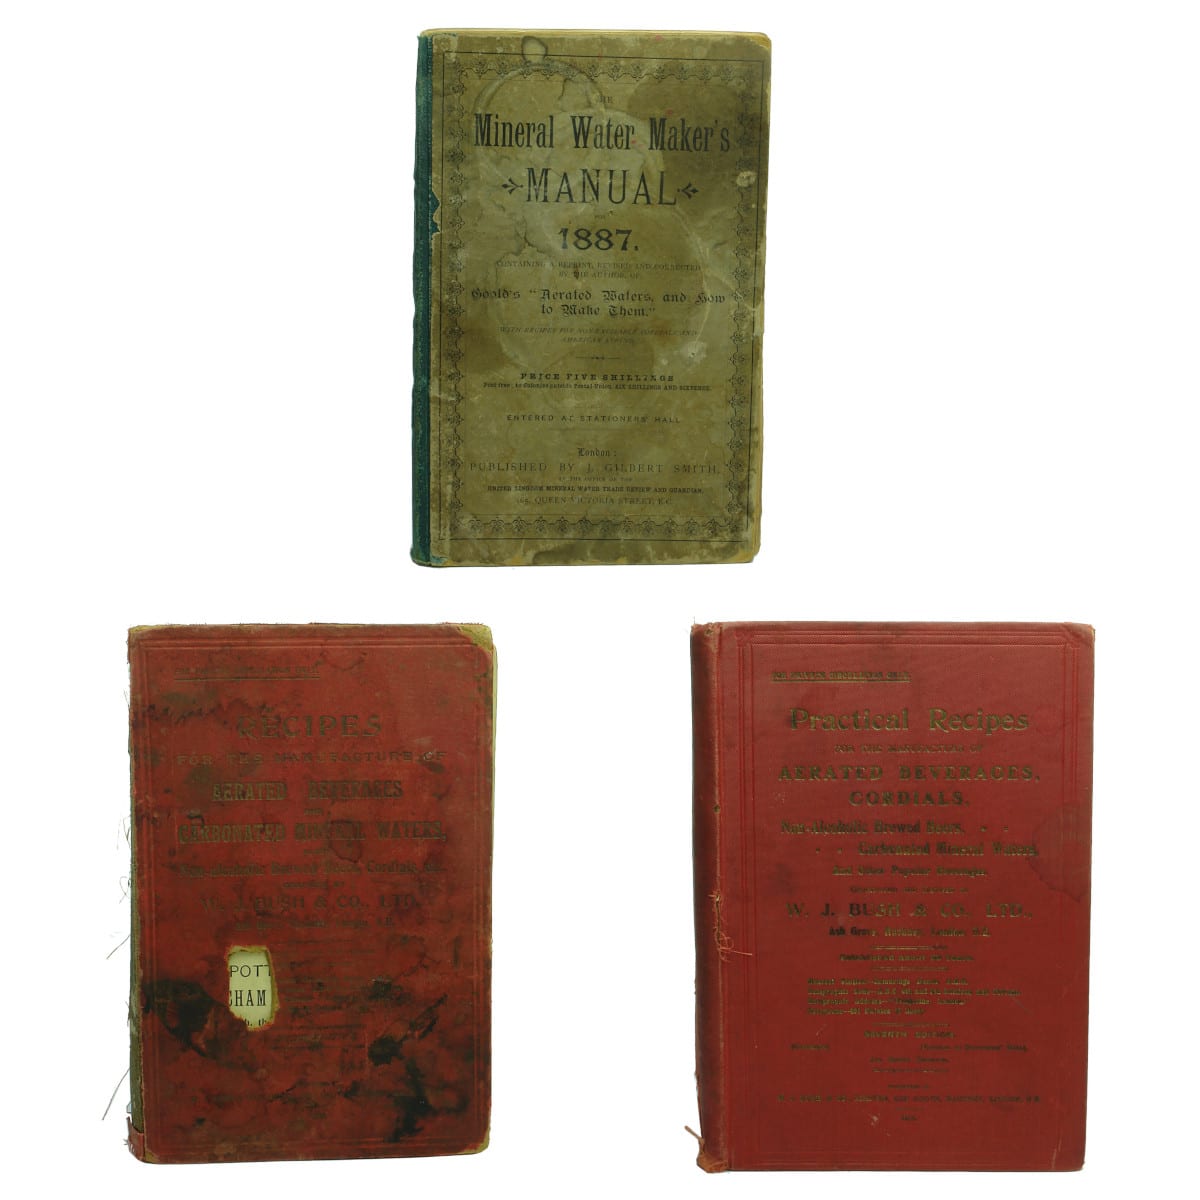 3 Books. The Mineral Water Maker's Manual for 1887; Recipes from Bush & Co 1903; Recipes from Bush & Co 1909.